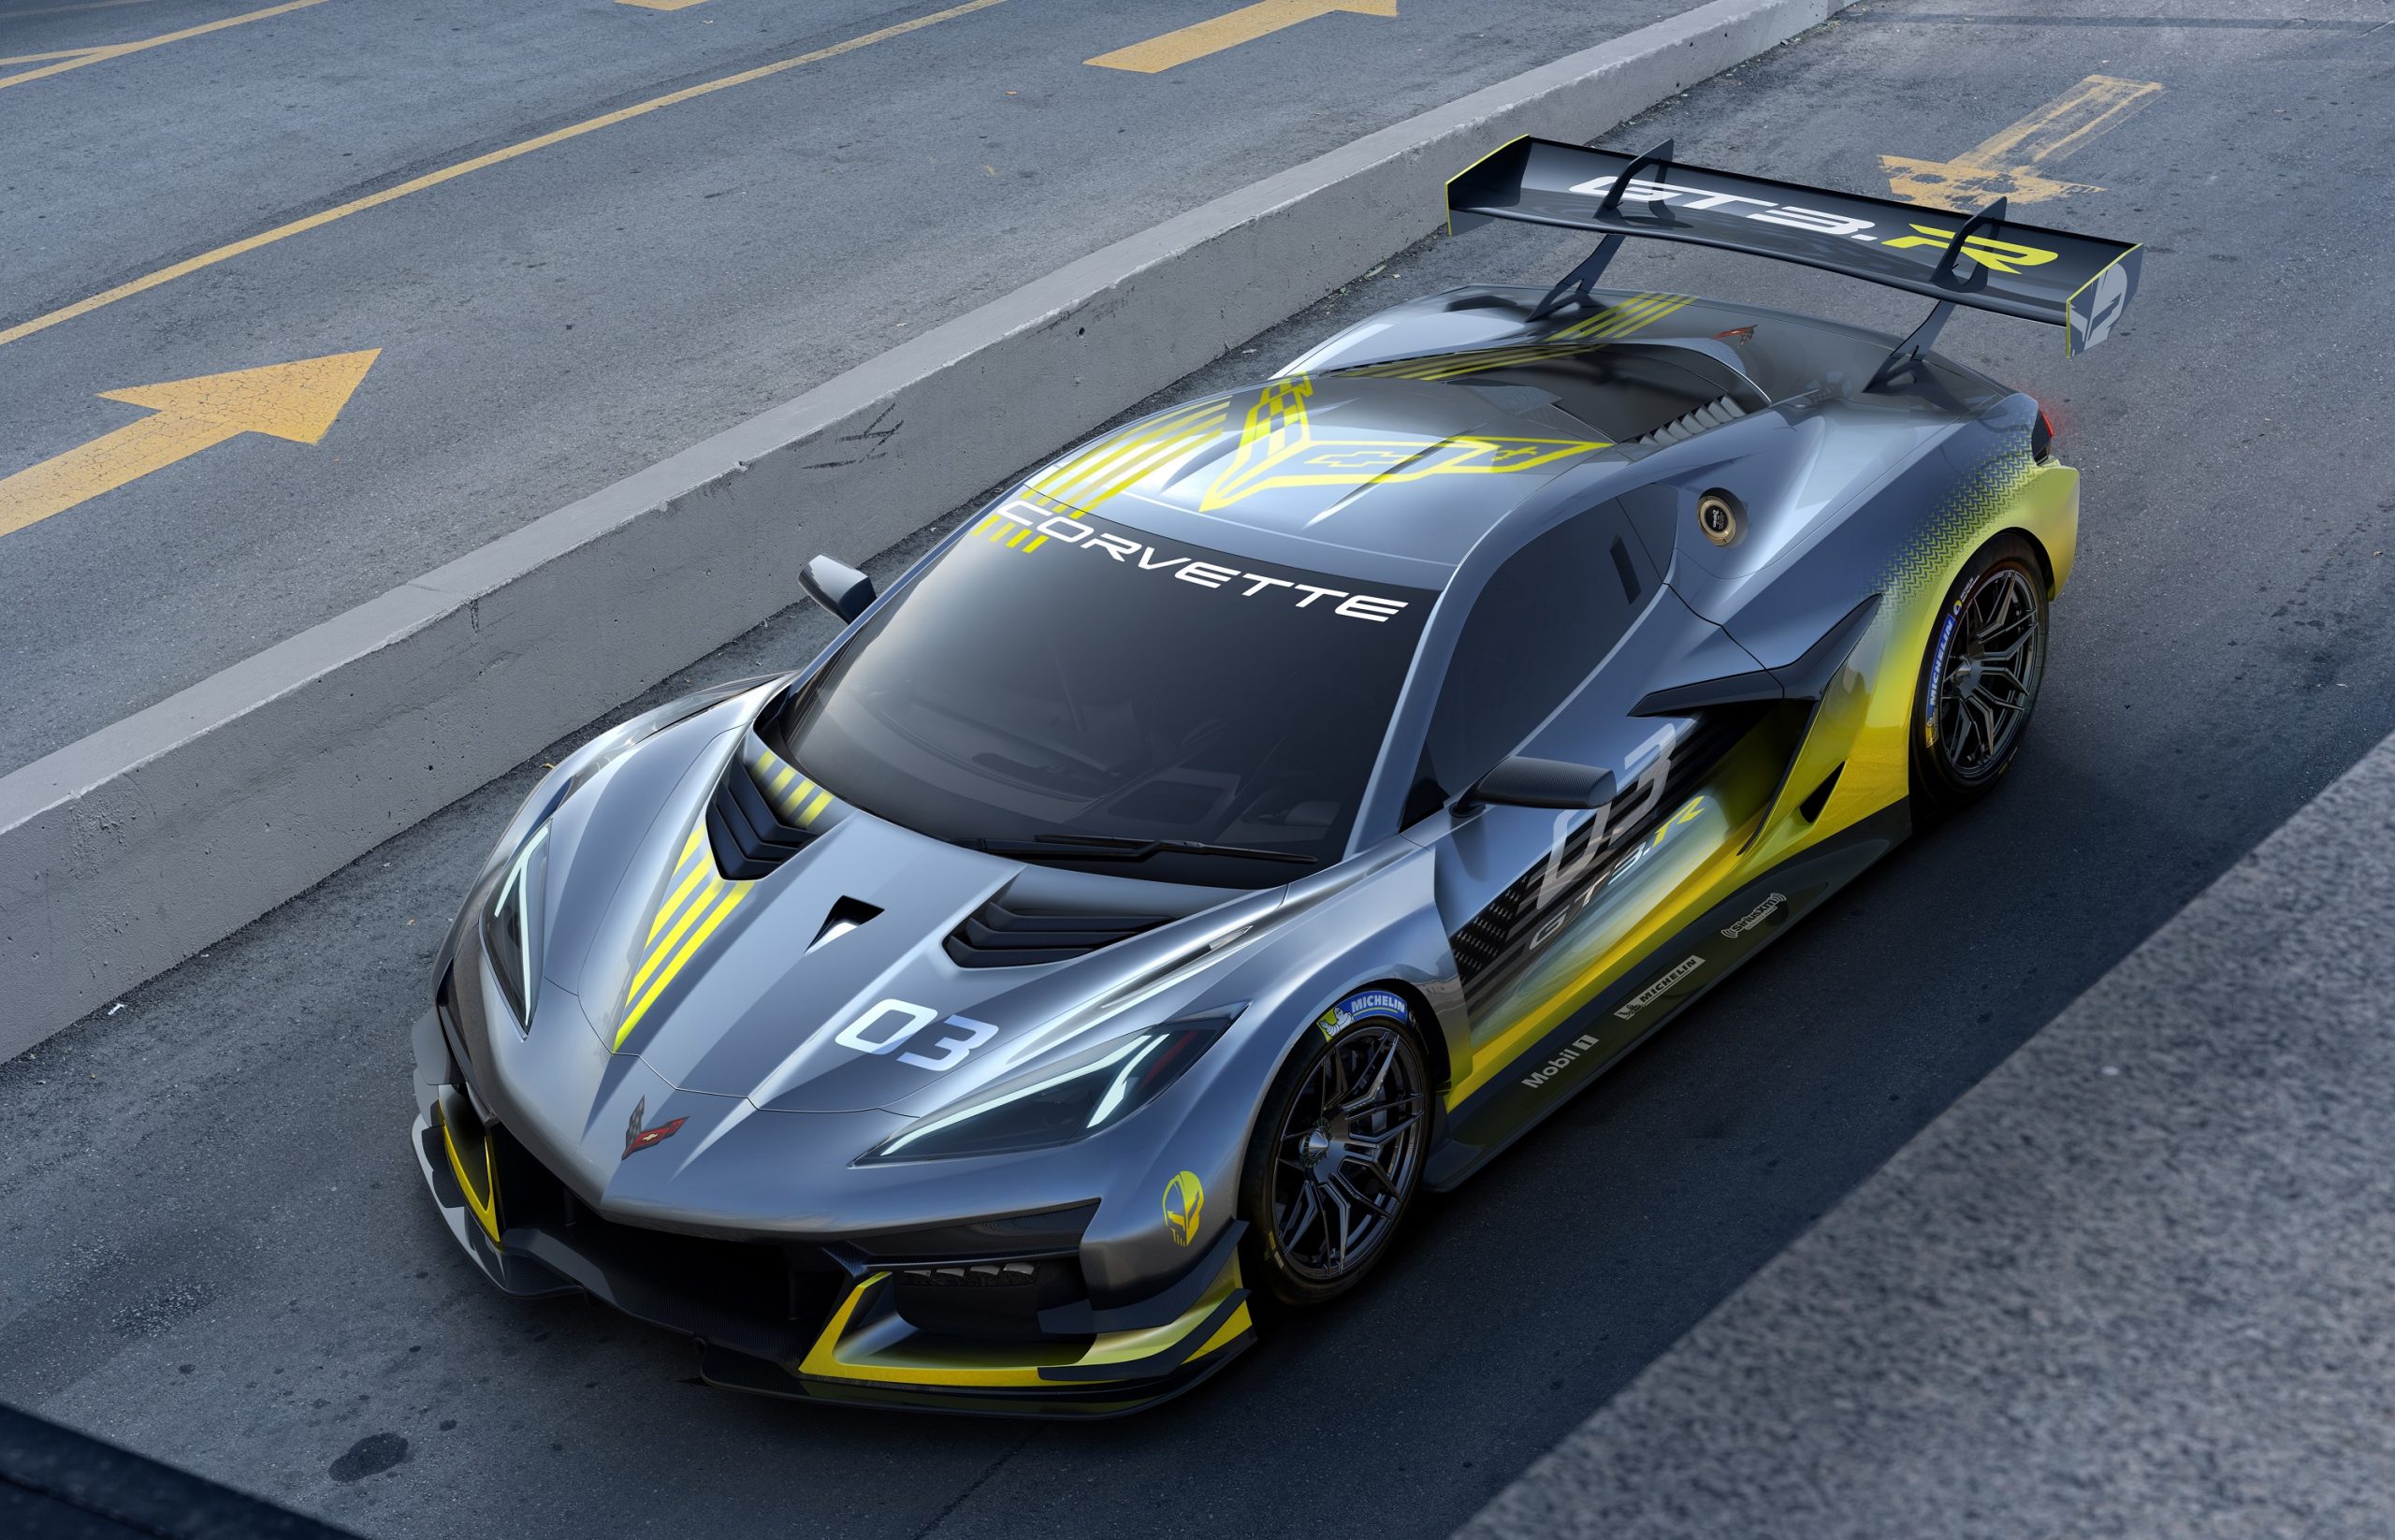 A grey and yellow Chevrolet Corvette C8.R race car shot from the high 3/4 angle in the pit lane